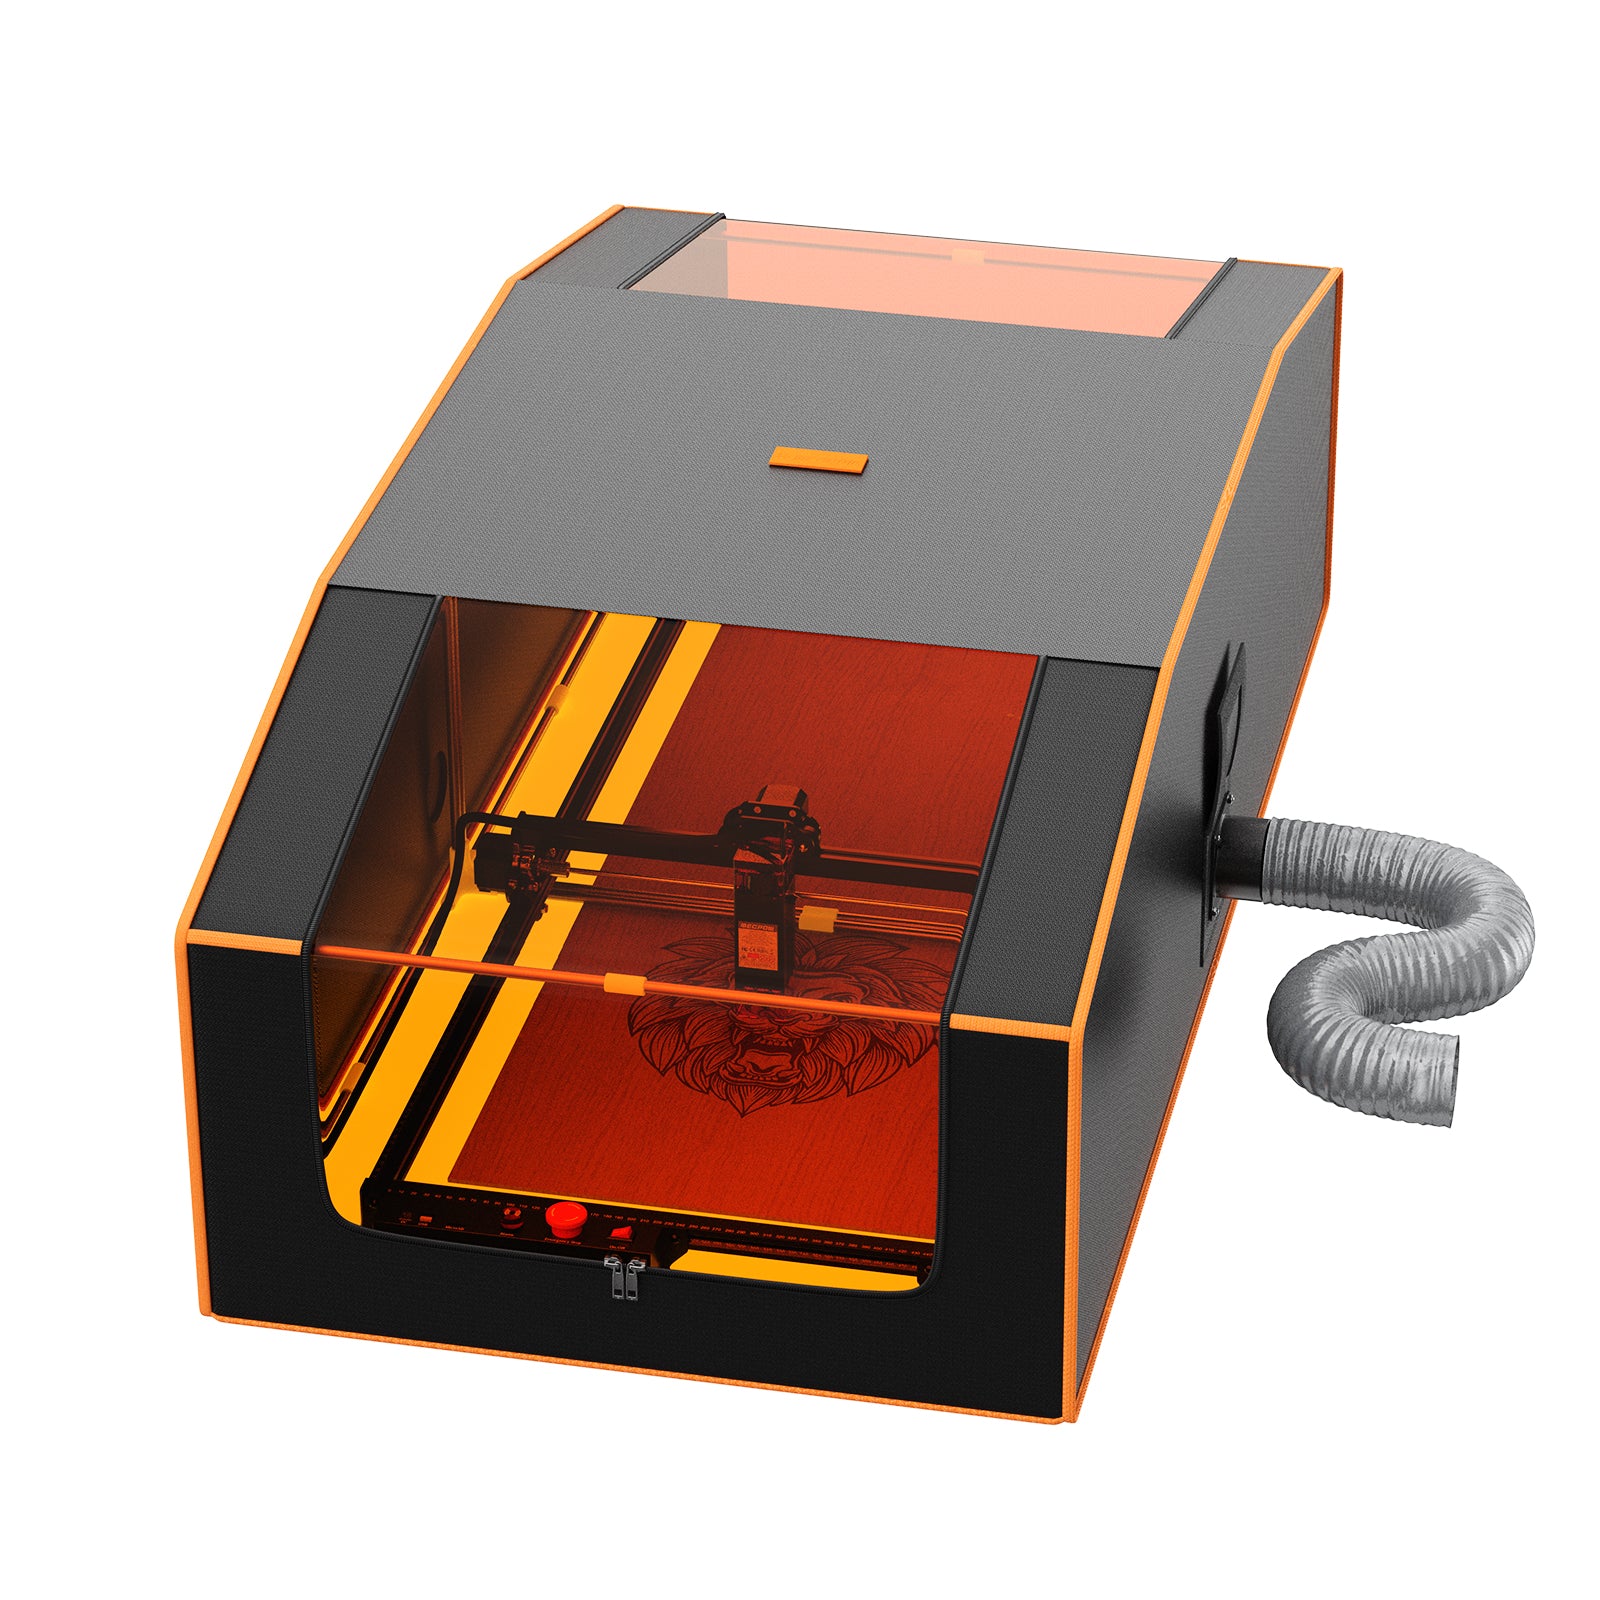 Mecpow FC1 Fireproof Enclosure for Laser Engravers